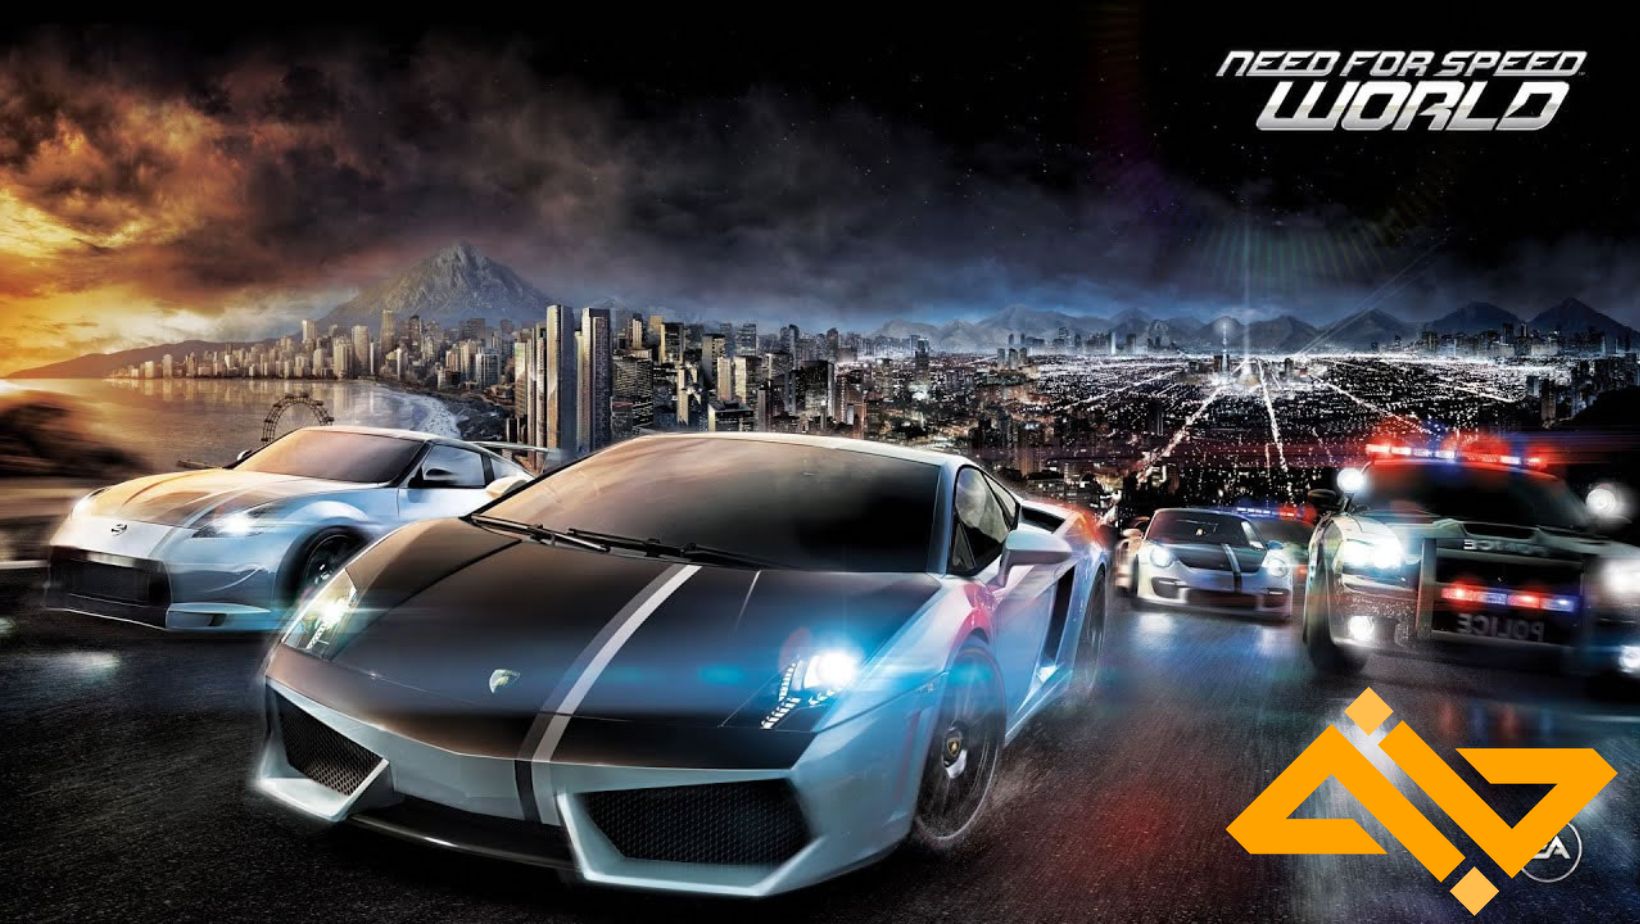 NFS World is exclusive to PC and mixes classic NFS elements with MMO mechanics.